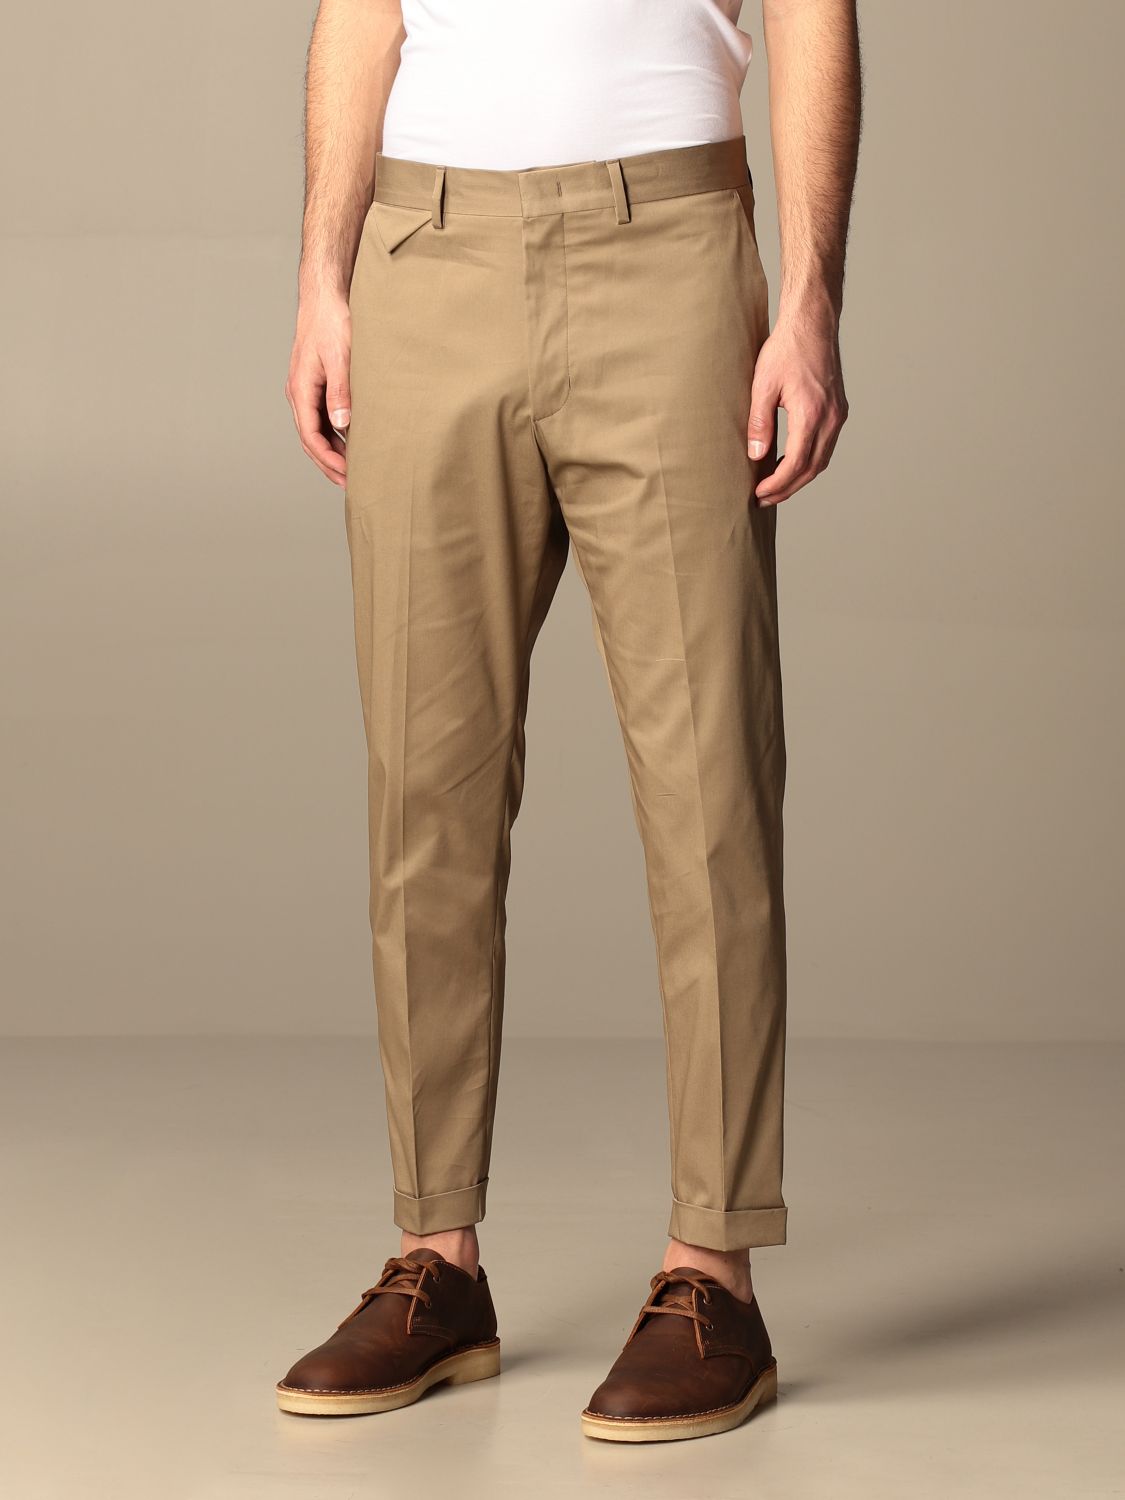 LOW BRAND: Classic pants with america pockets | Pants Low Brand Men ...